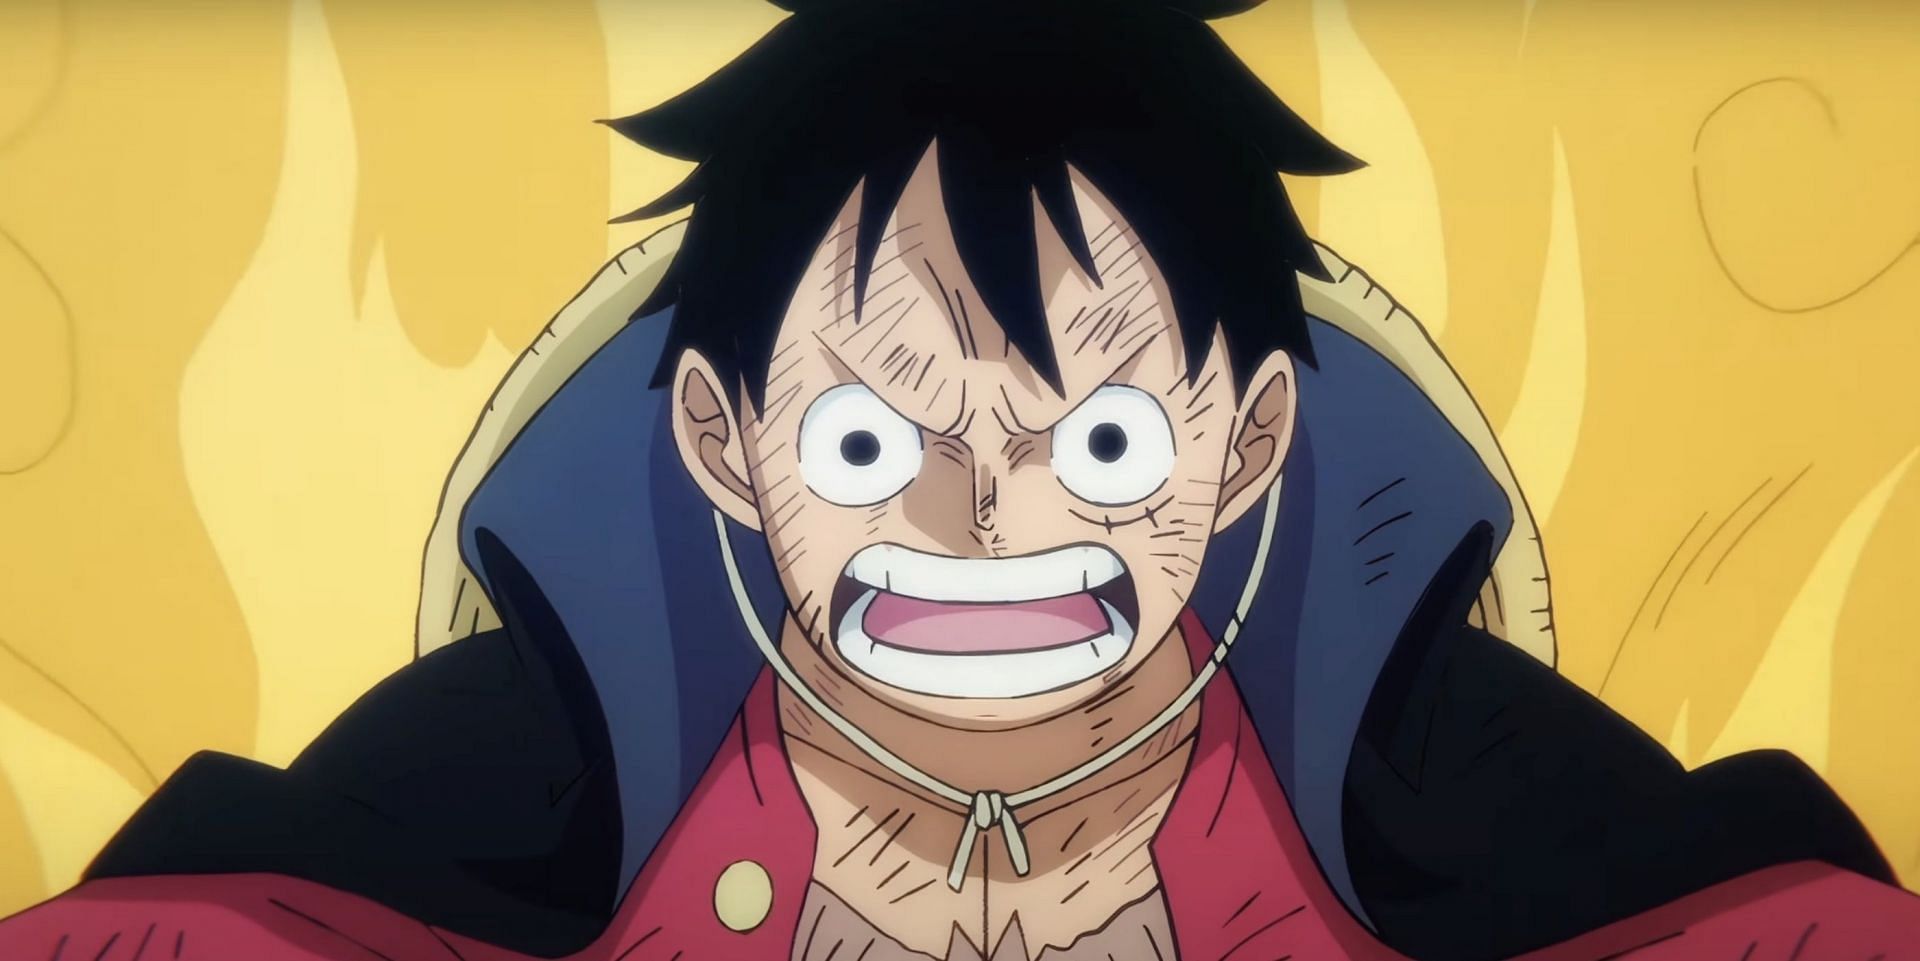 Monkey D. Luffy as seen in anime (Image via Toei Animation)